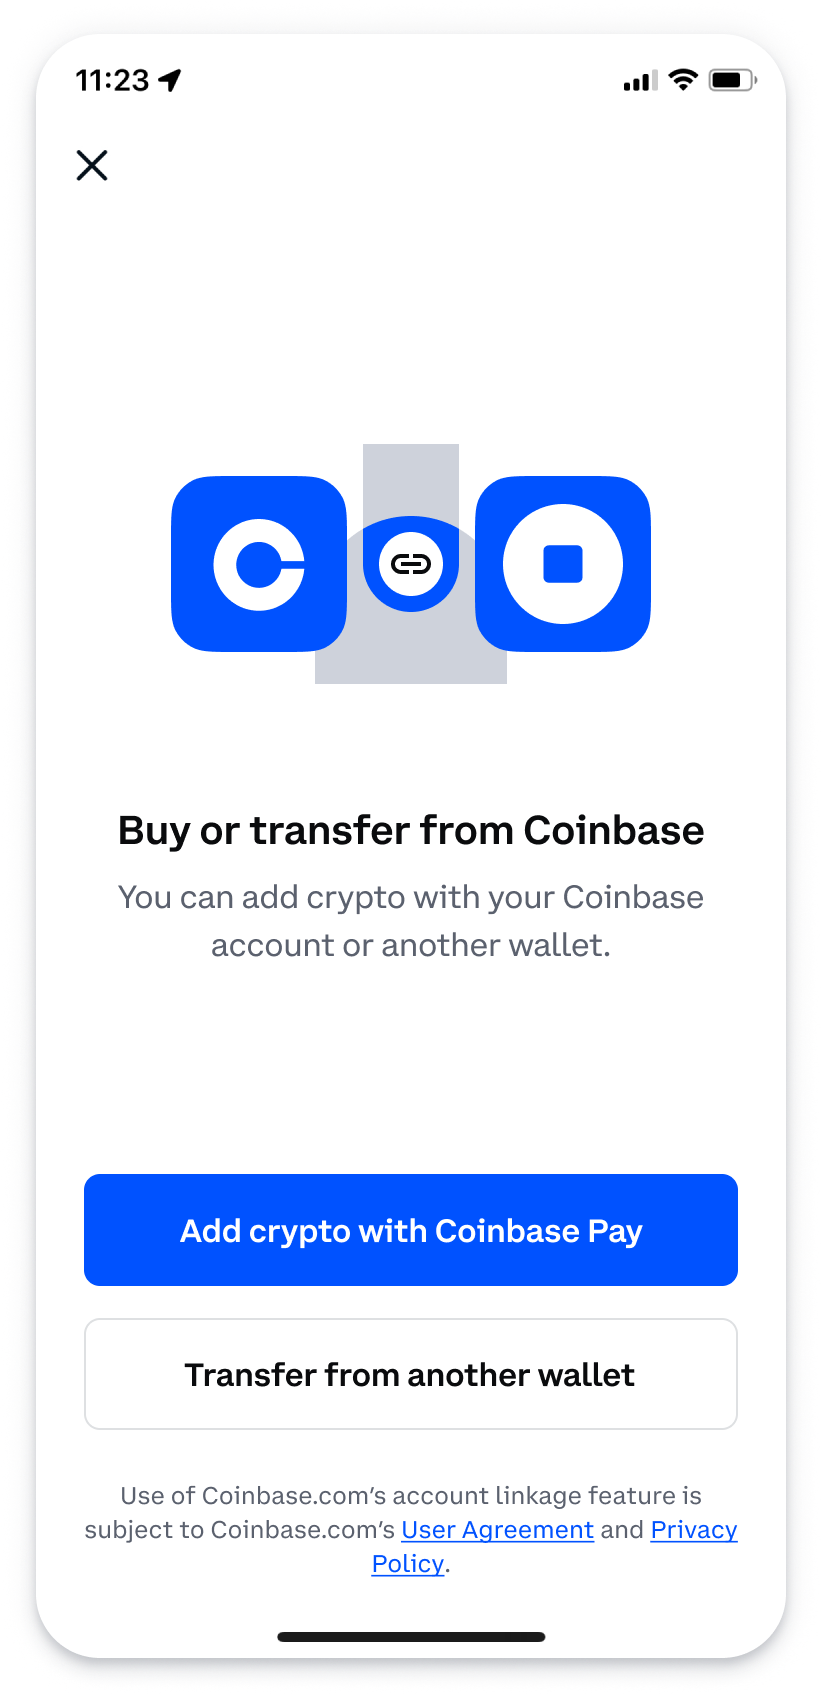 Start the process of using the assets and payment methods in your Coinbase account on dapps and any self-custody wallet.